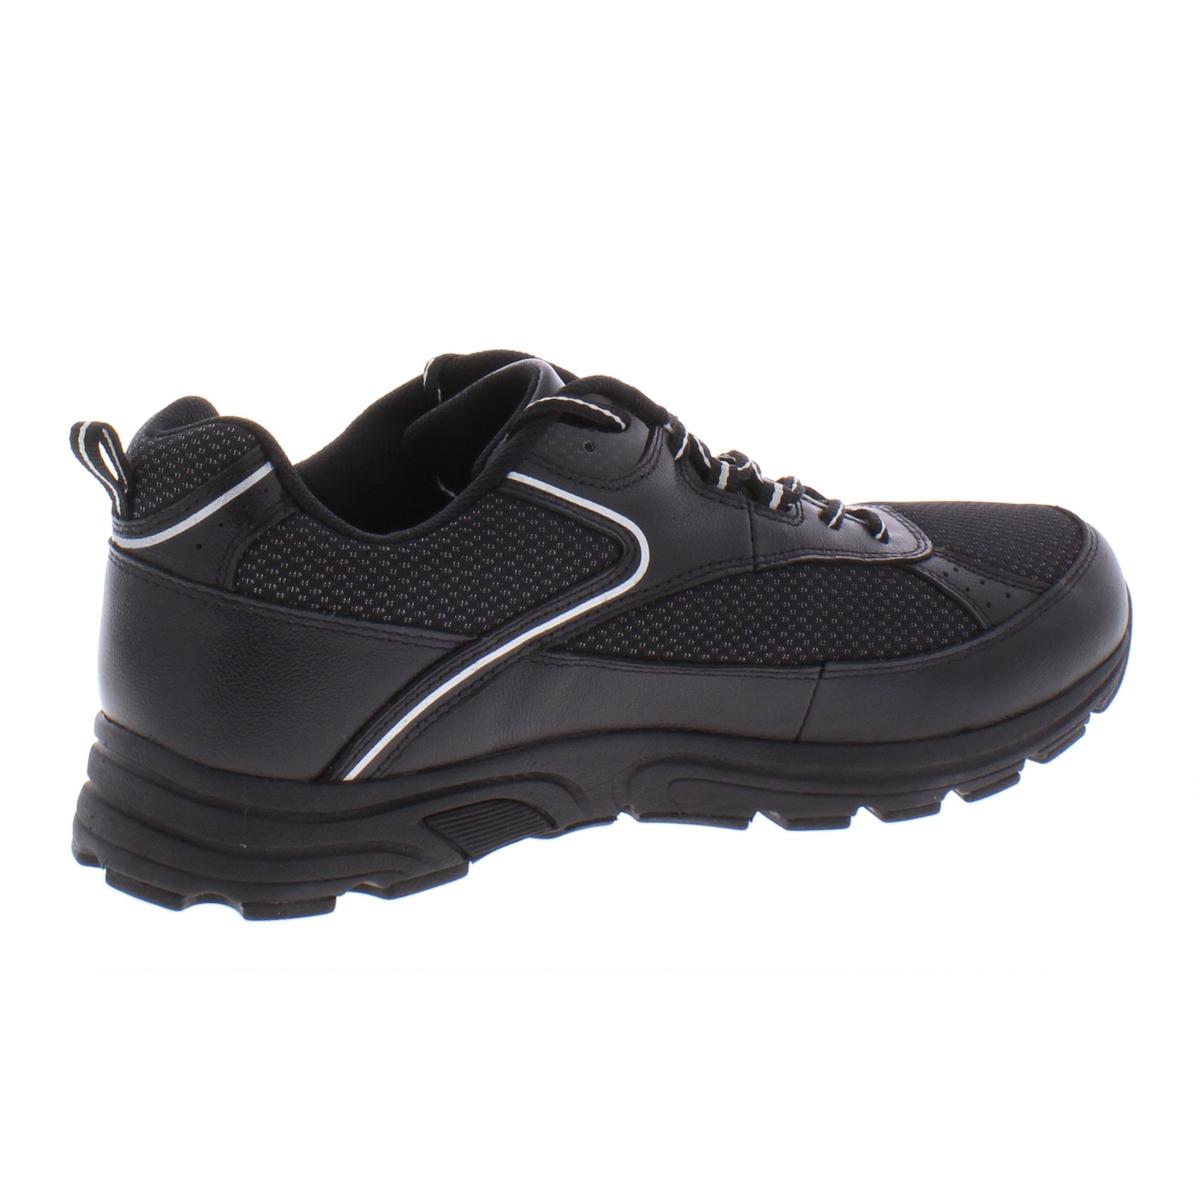 Drew Womens Athena Black Running Shoes Sneakers 11.5 Wide (C,D,W) BHFO ...